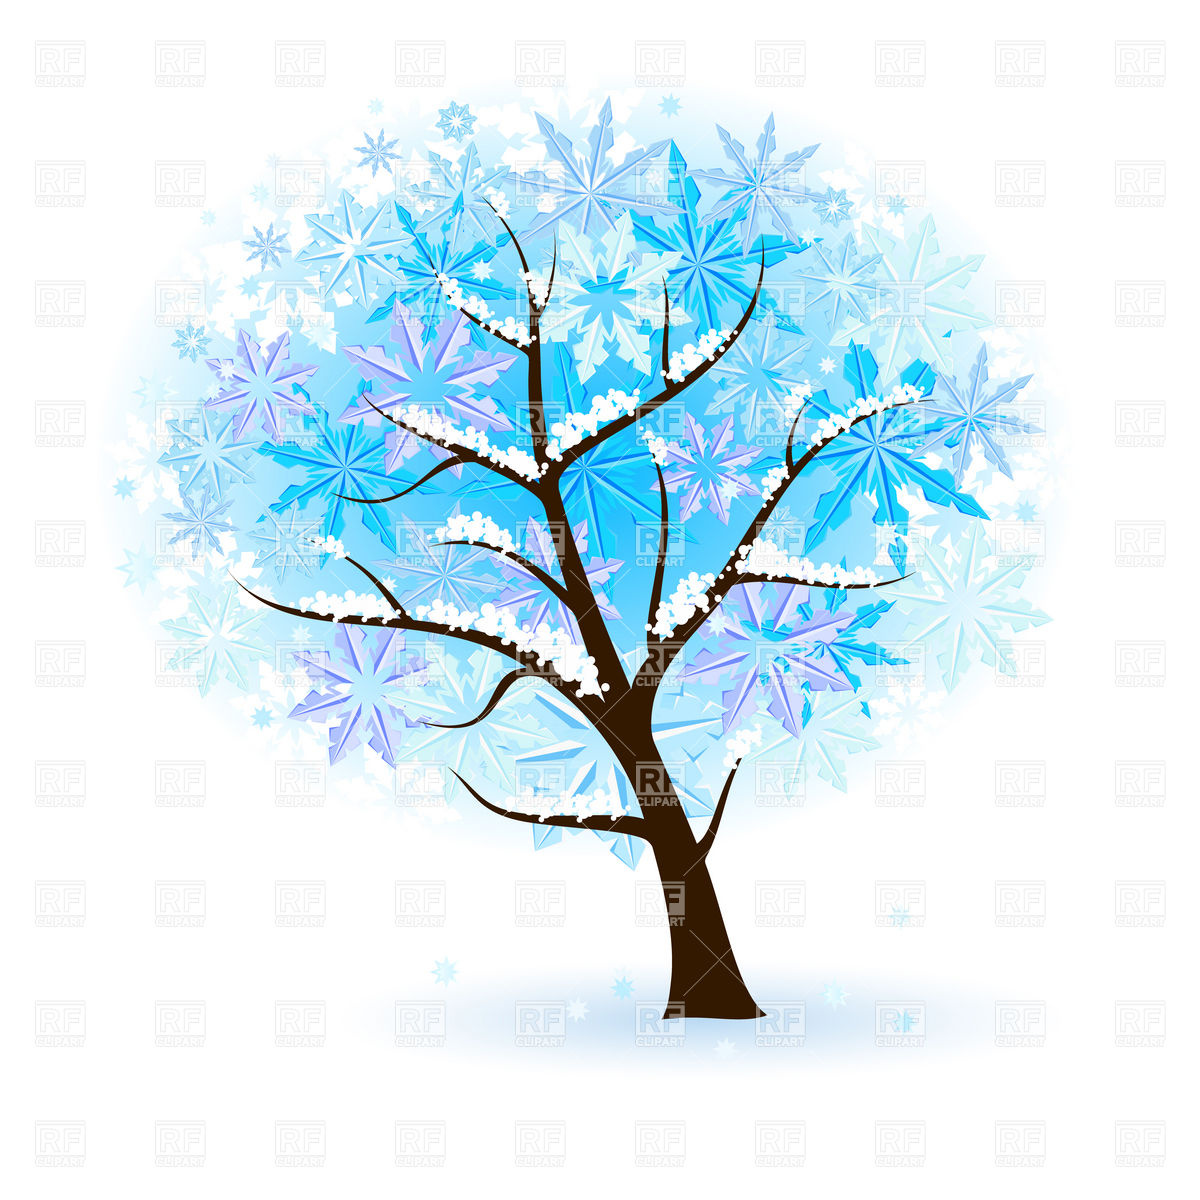 Stylized Winter Tree 8550 Plants And Animals Download Royalty Free